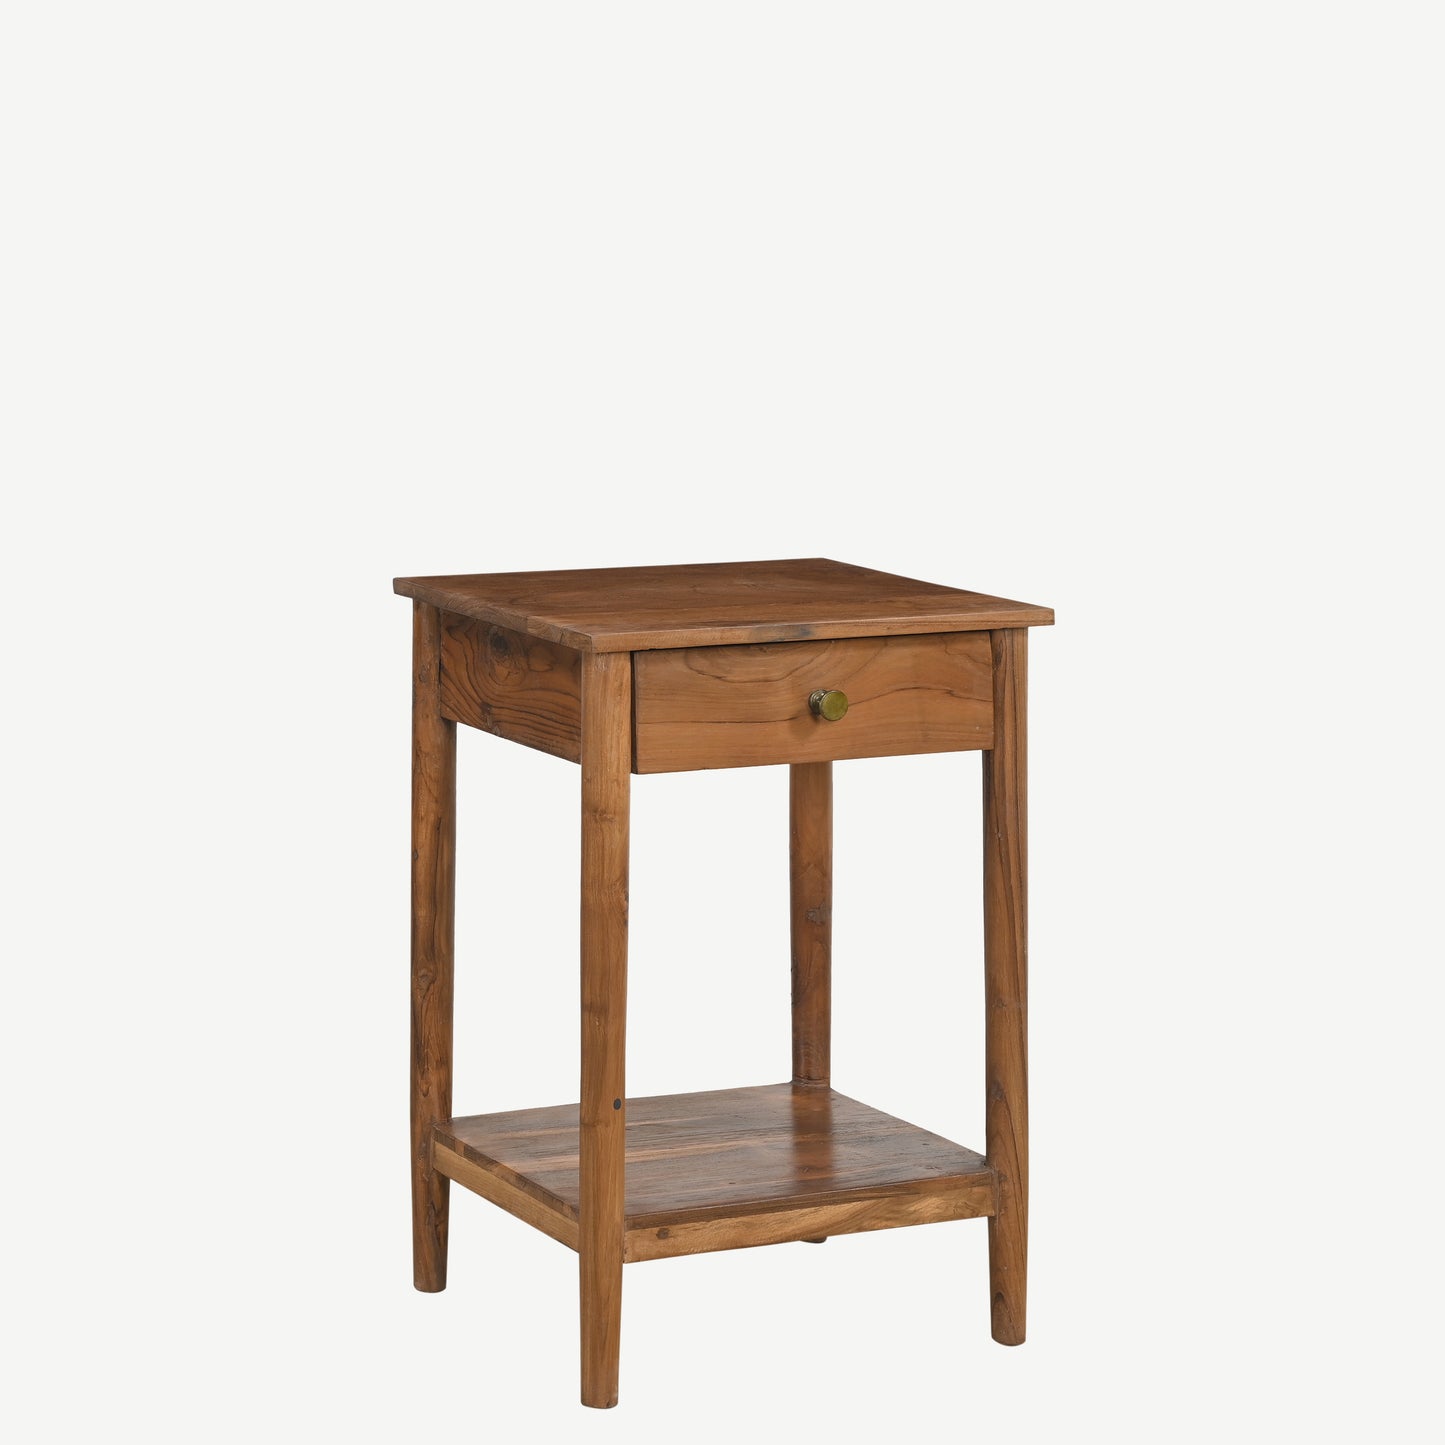 The Quin Antique Side Table